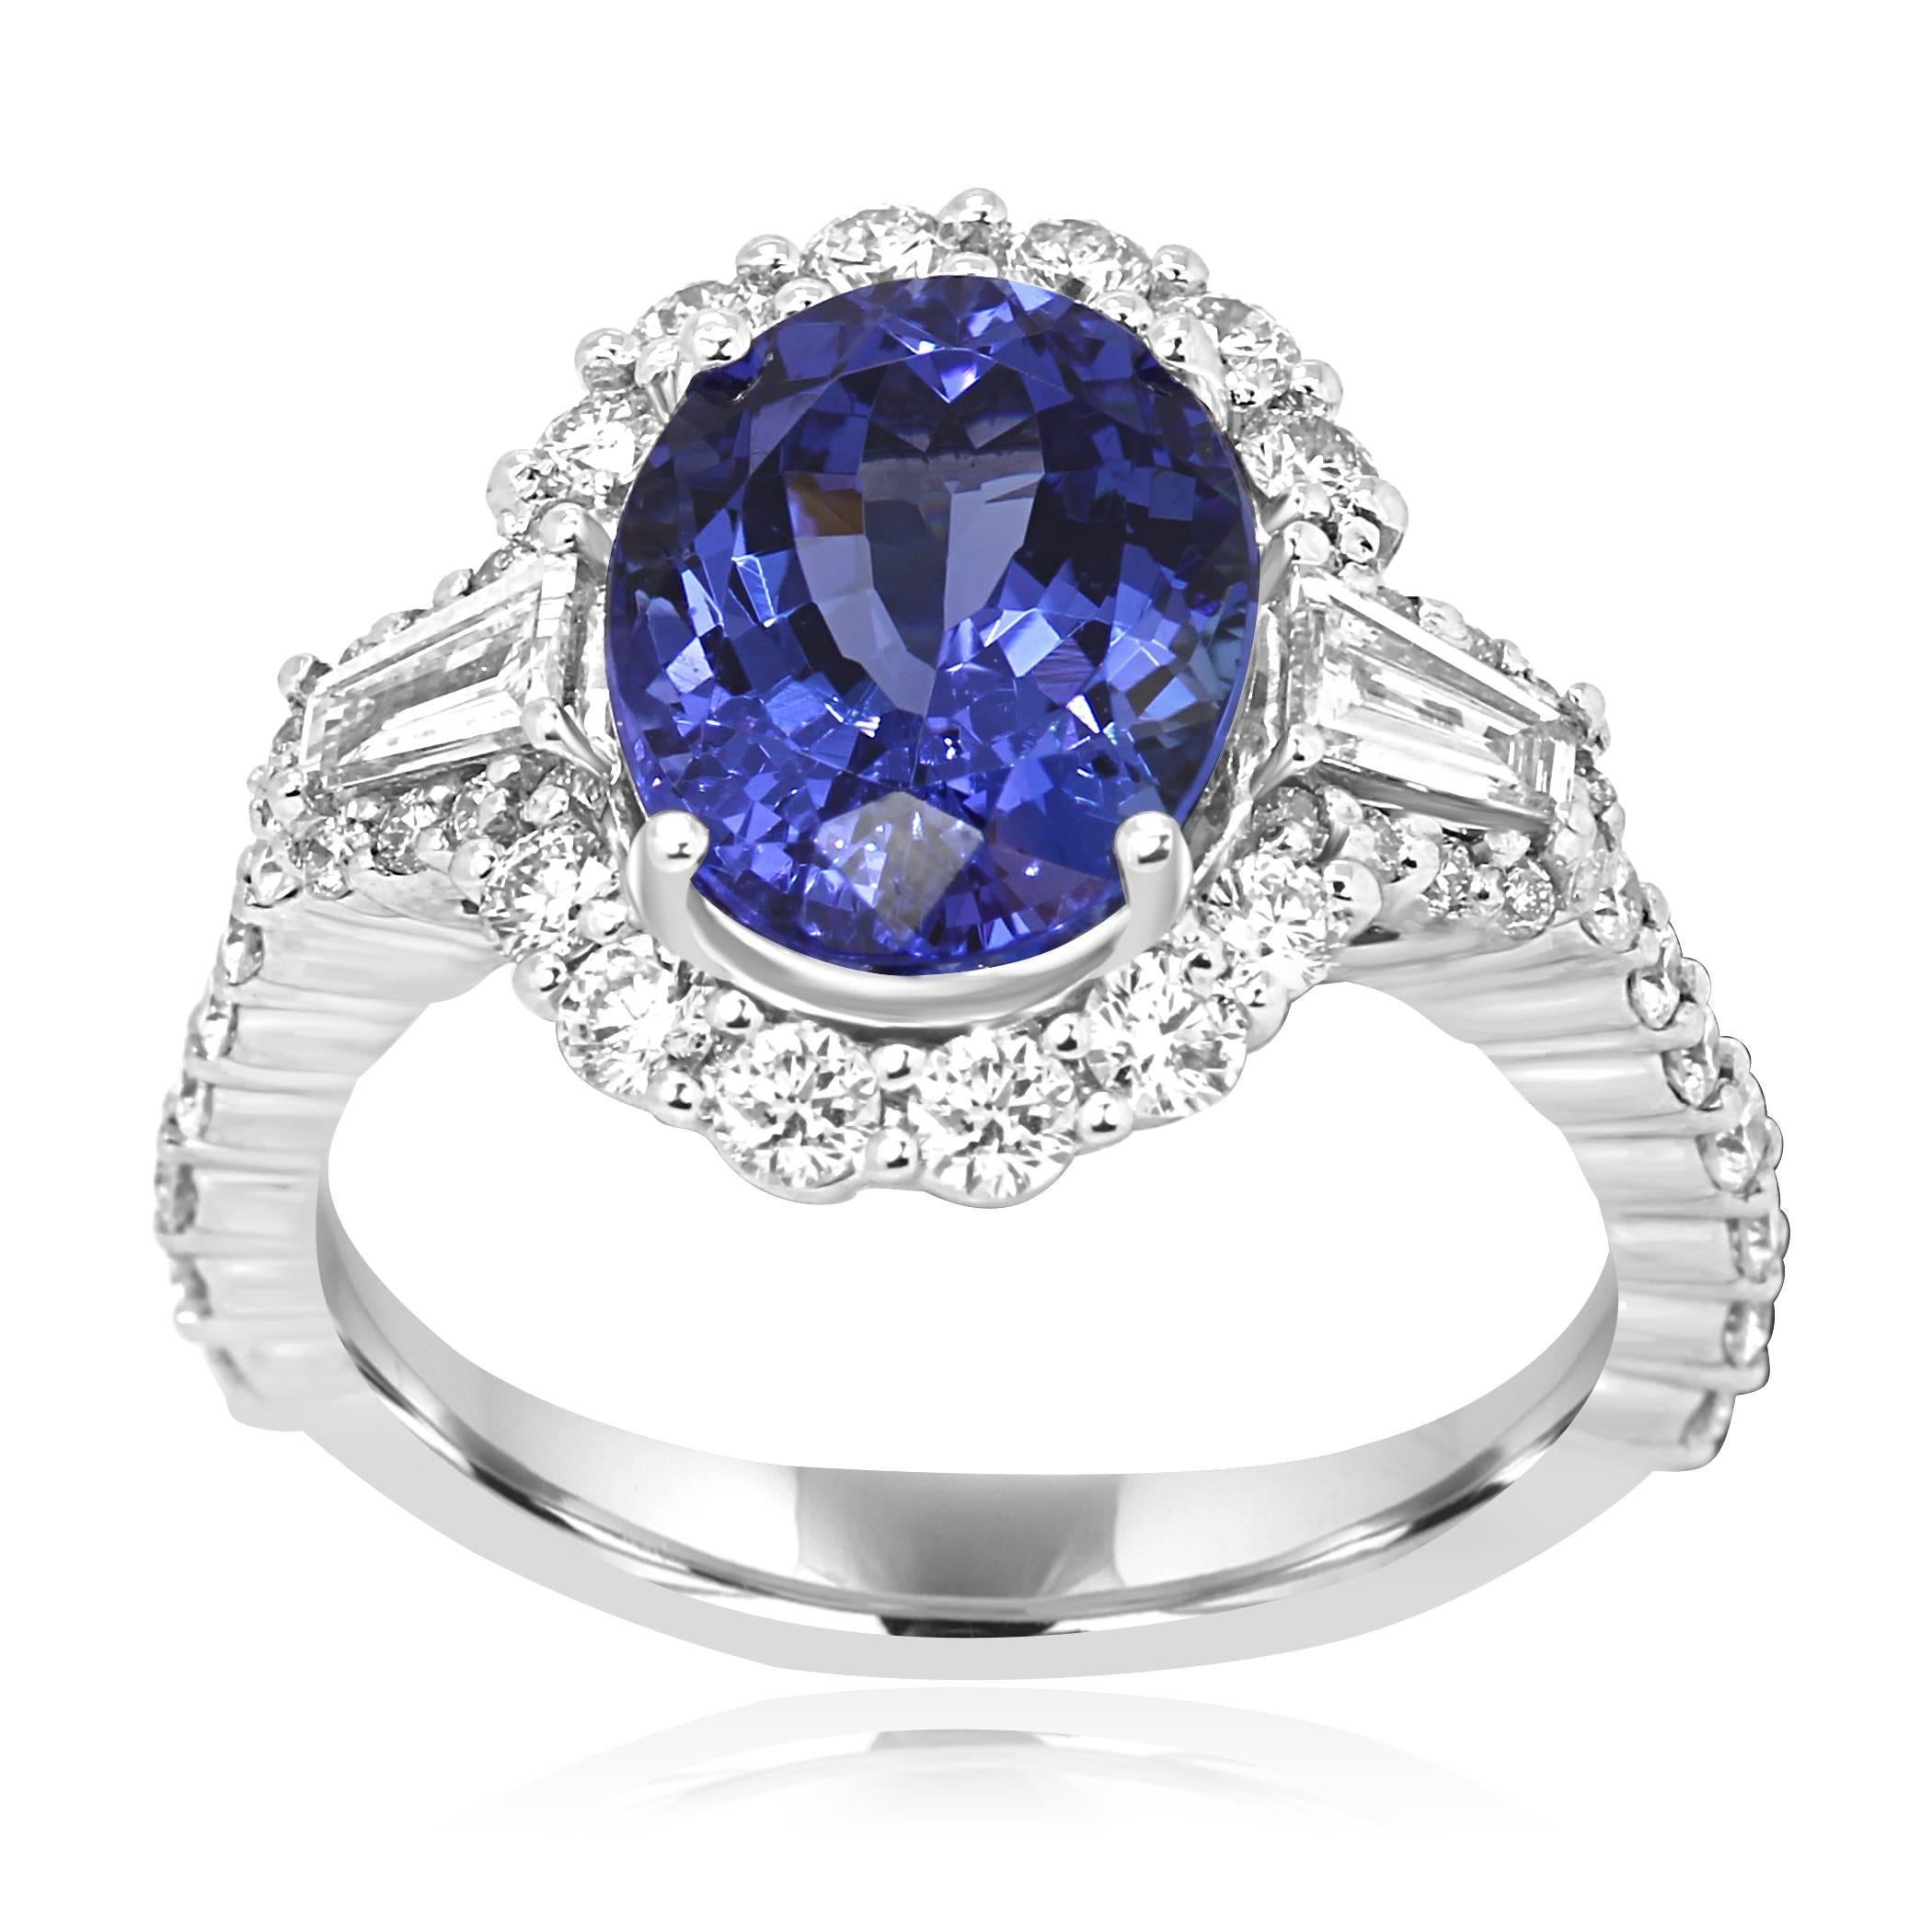 Gorgeous Tanzanite Oval 3.66 Carat encircled in a single Halo of White Round Diamonds 0.85 Carat flanked by 2 White Diamond Tapers on the side 0.28 Carat in 14K White Gold Ring.

Style available in different price ranges. Prices are based on your